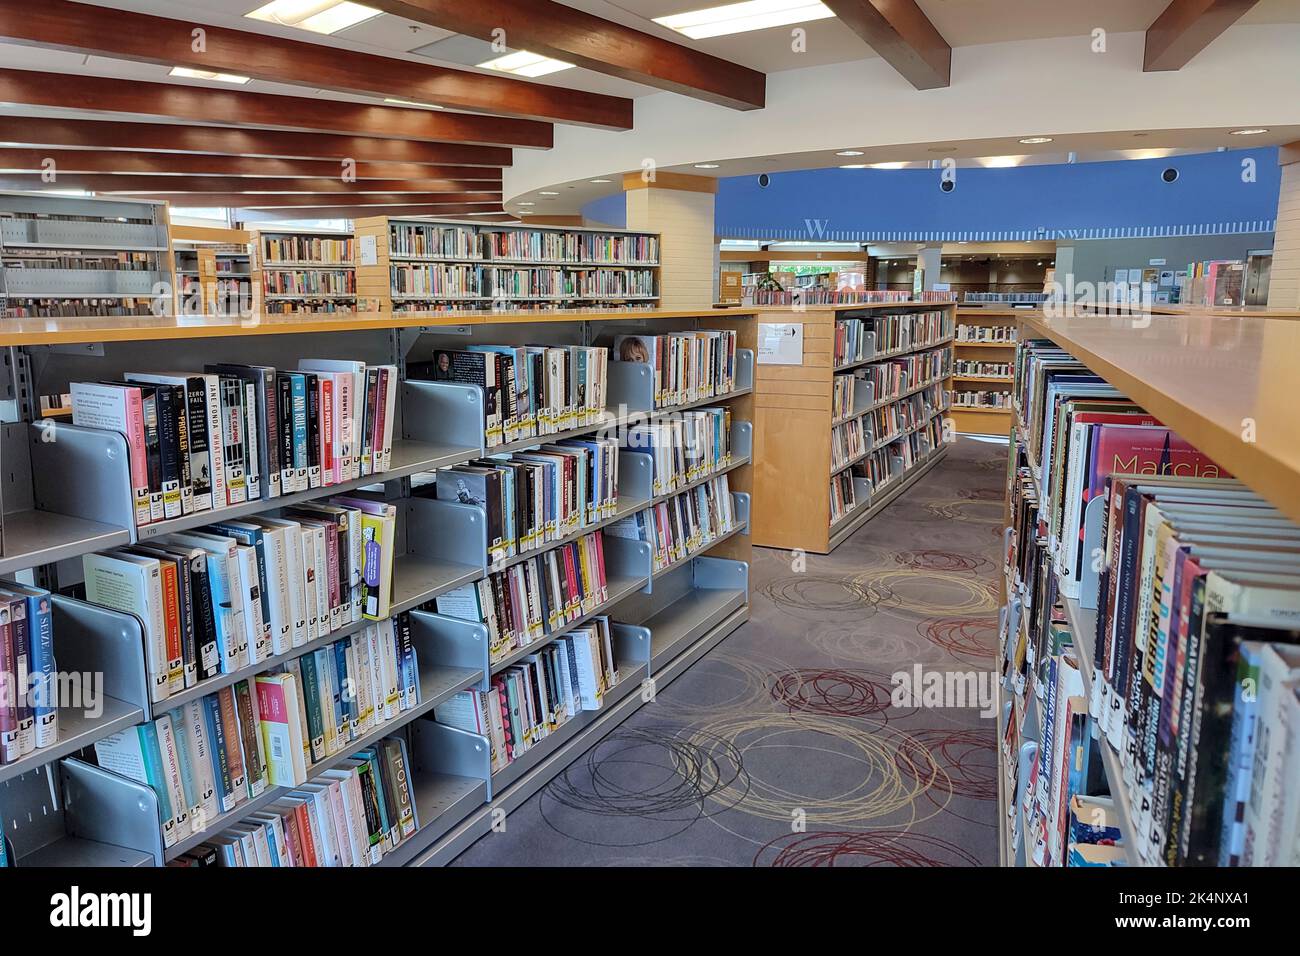 Public library. Bookshelves with books and textbooks. Learning and education concept. Stock Photo